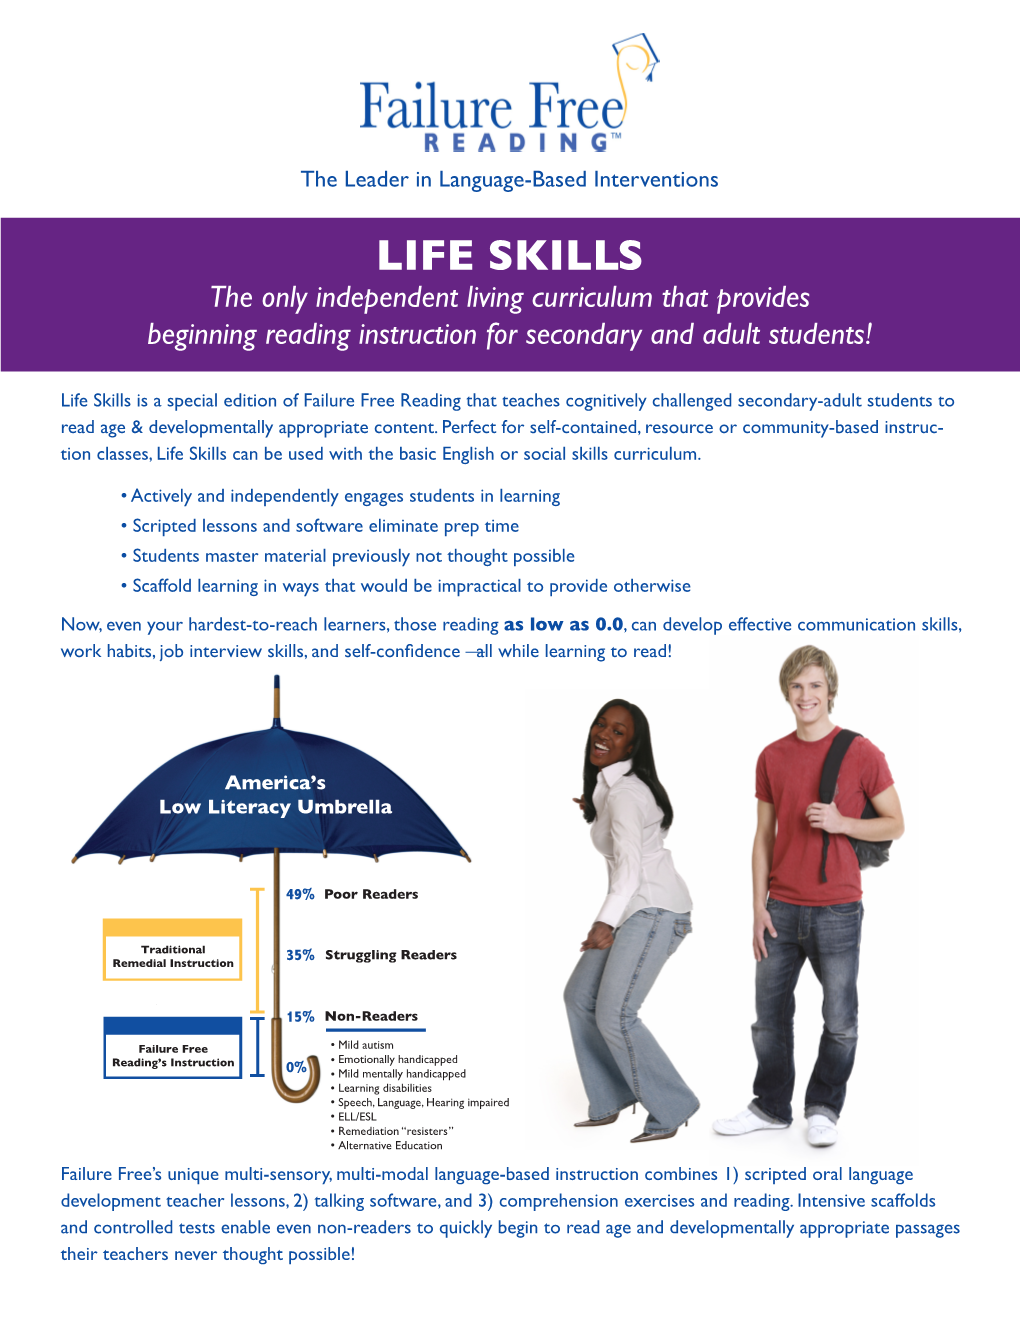 LIFE SKILLS the Only Independent Living Curriculum That Provides Beginning Reading Instruction for Secondary and Adult Students!